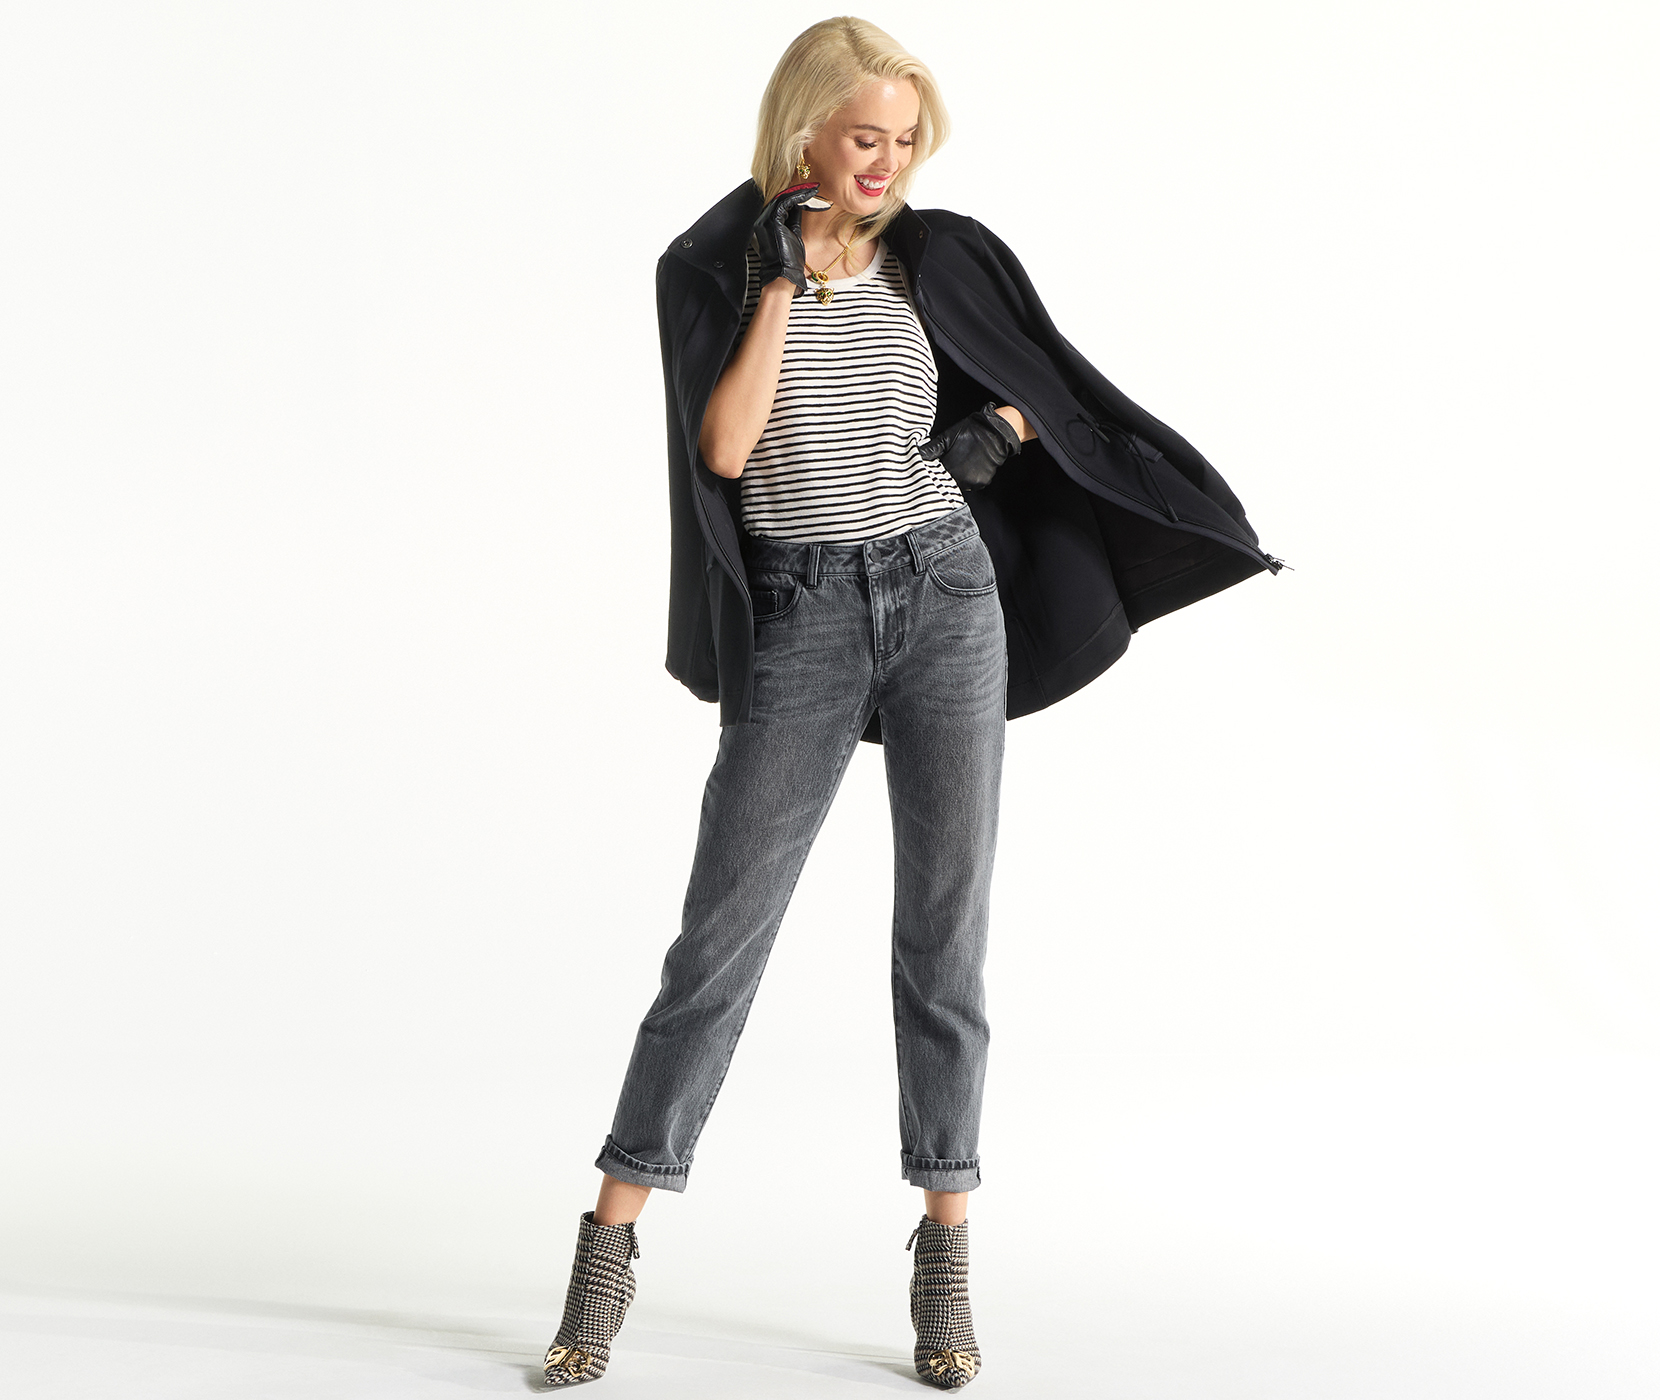 Jackets - Outerwear, Blazers, Coats | cabi clothing